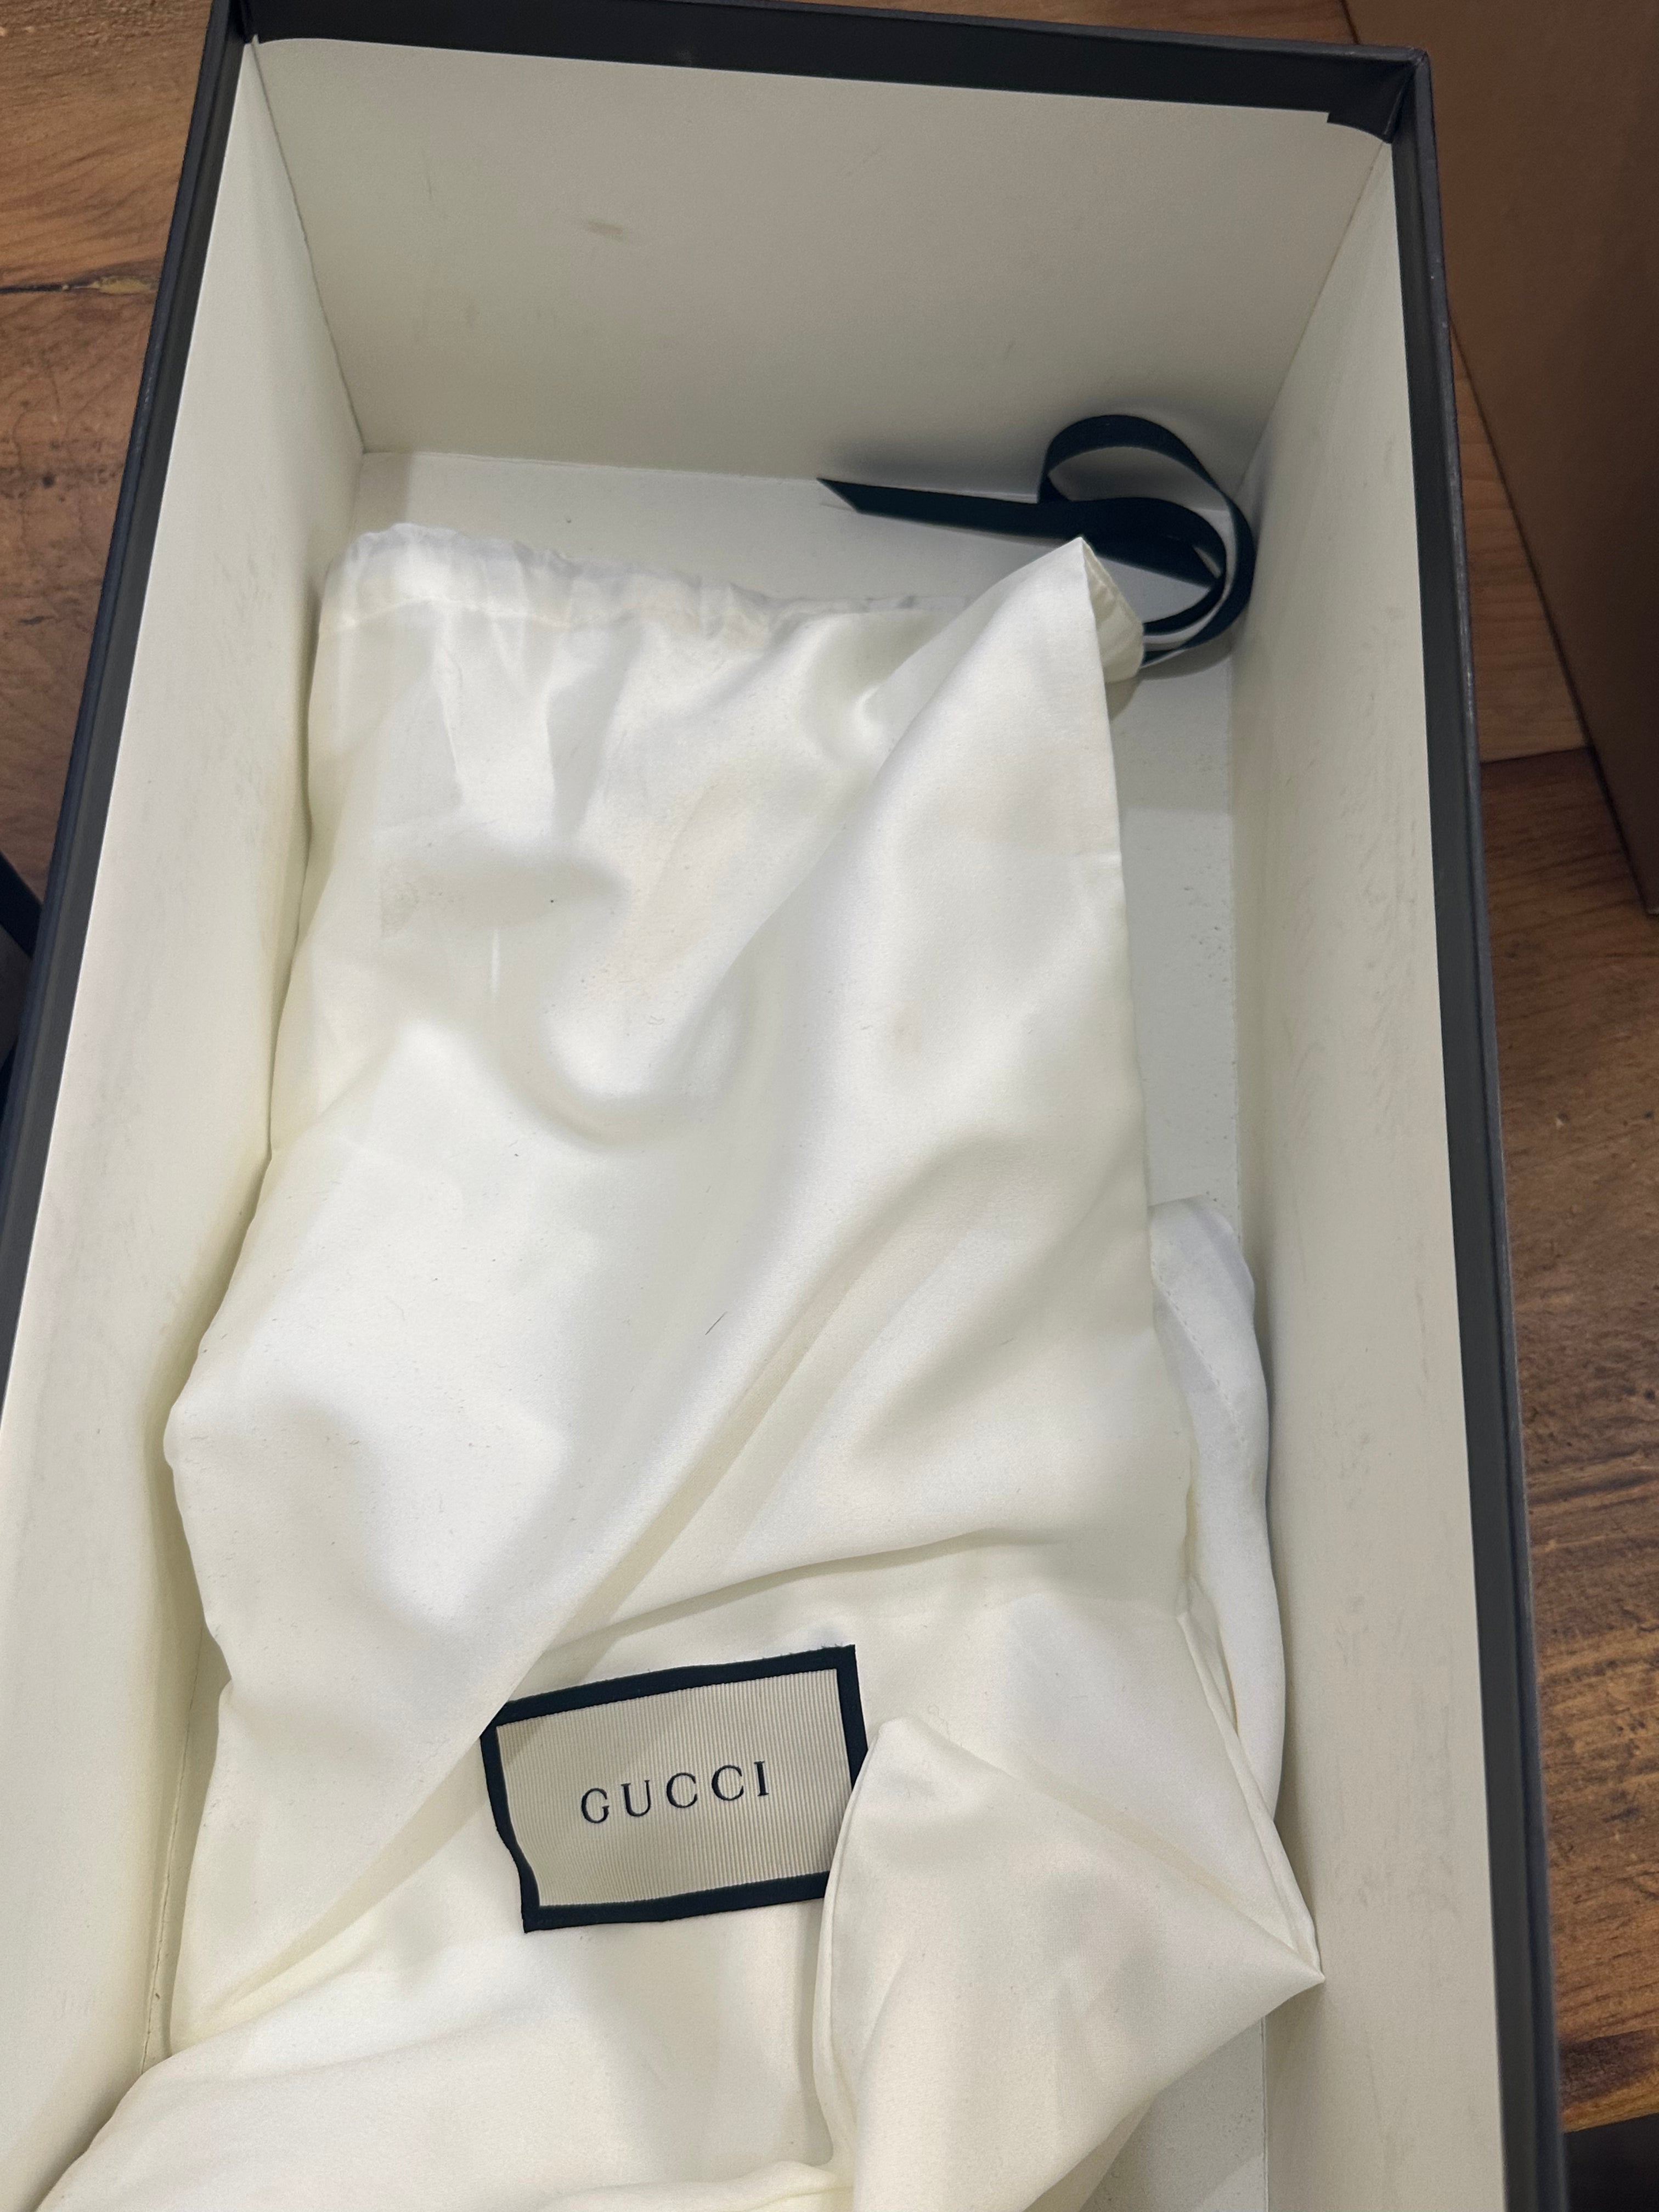 Gucci Ace GG “Beige” - Size 10